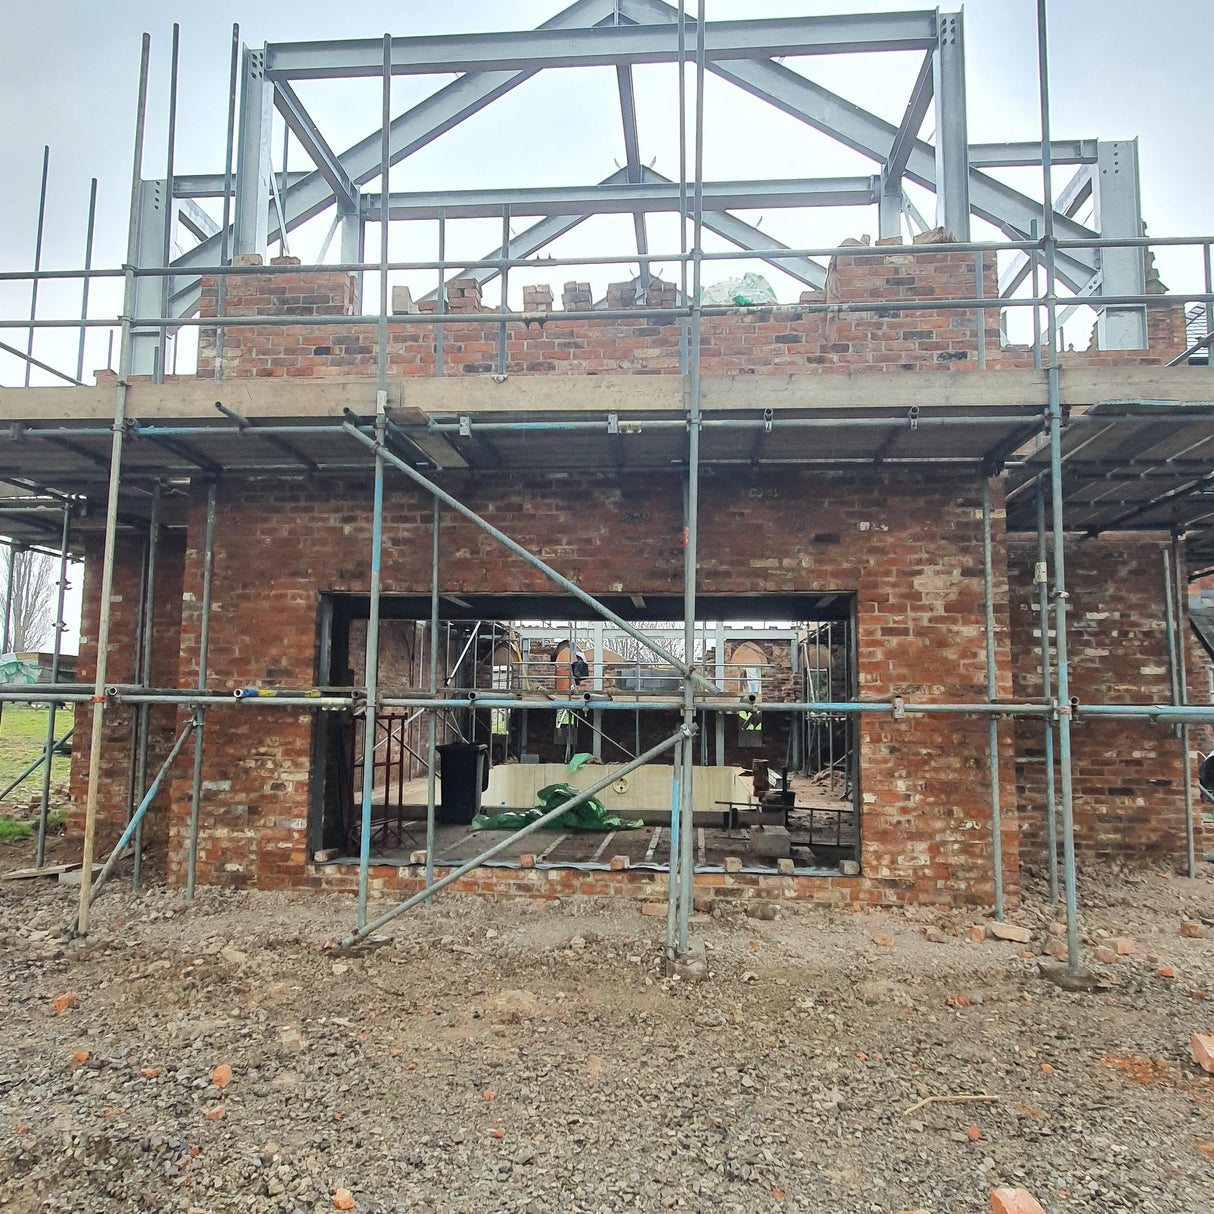 Over Tabley, Knutsford, Cheshire - Reclaimed Brick Company